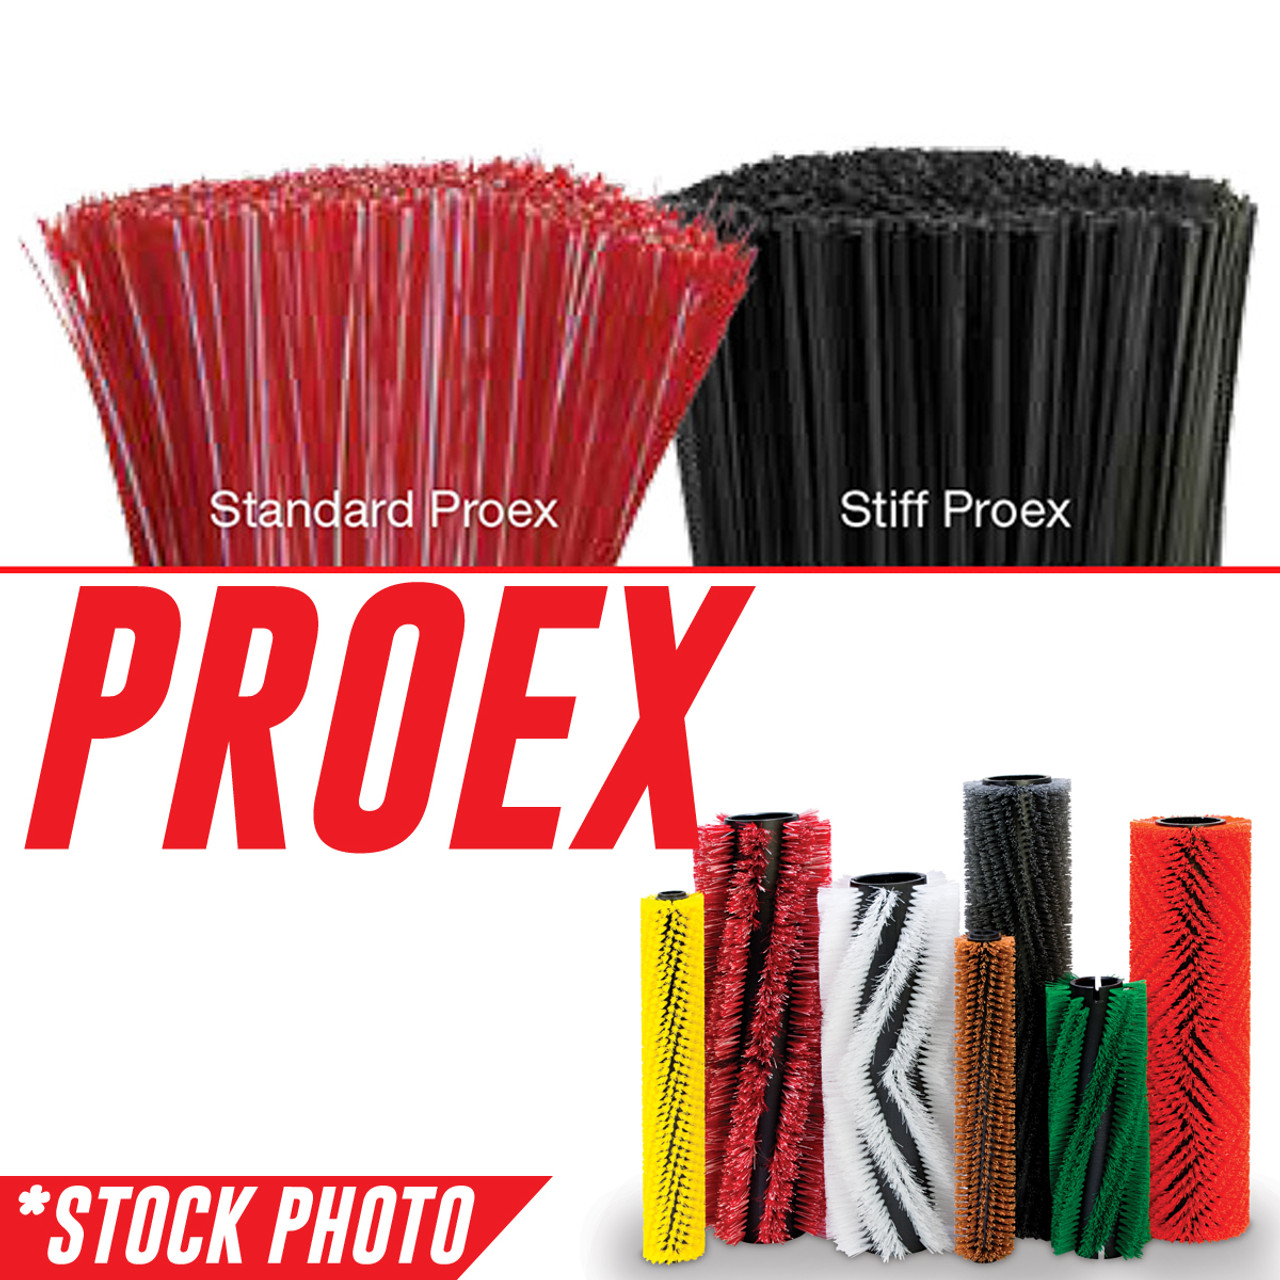 3300312: 36" Cylindrical Brush 8 Double Row Proex fits PowerBoss Models 52, 62, 65, 71, 75, 78, SW/6X